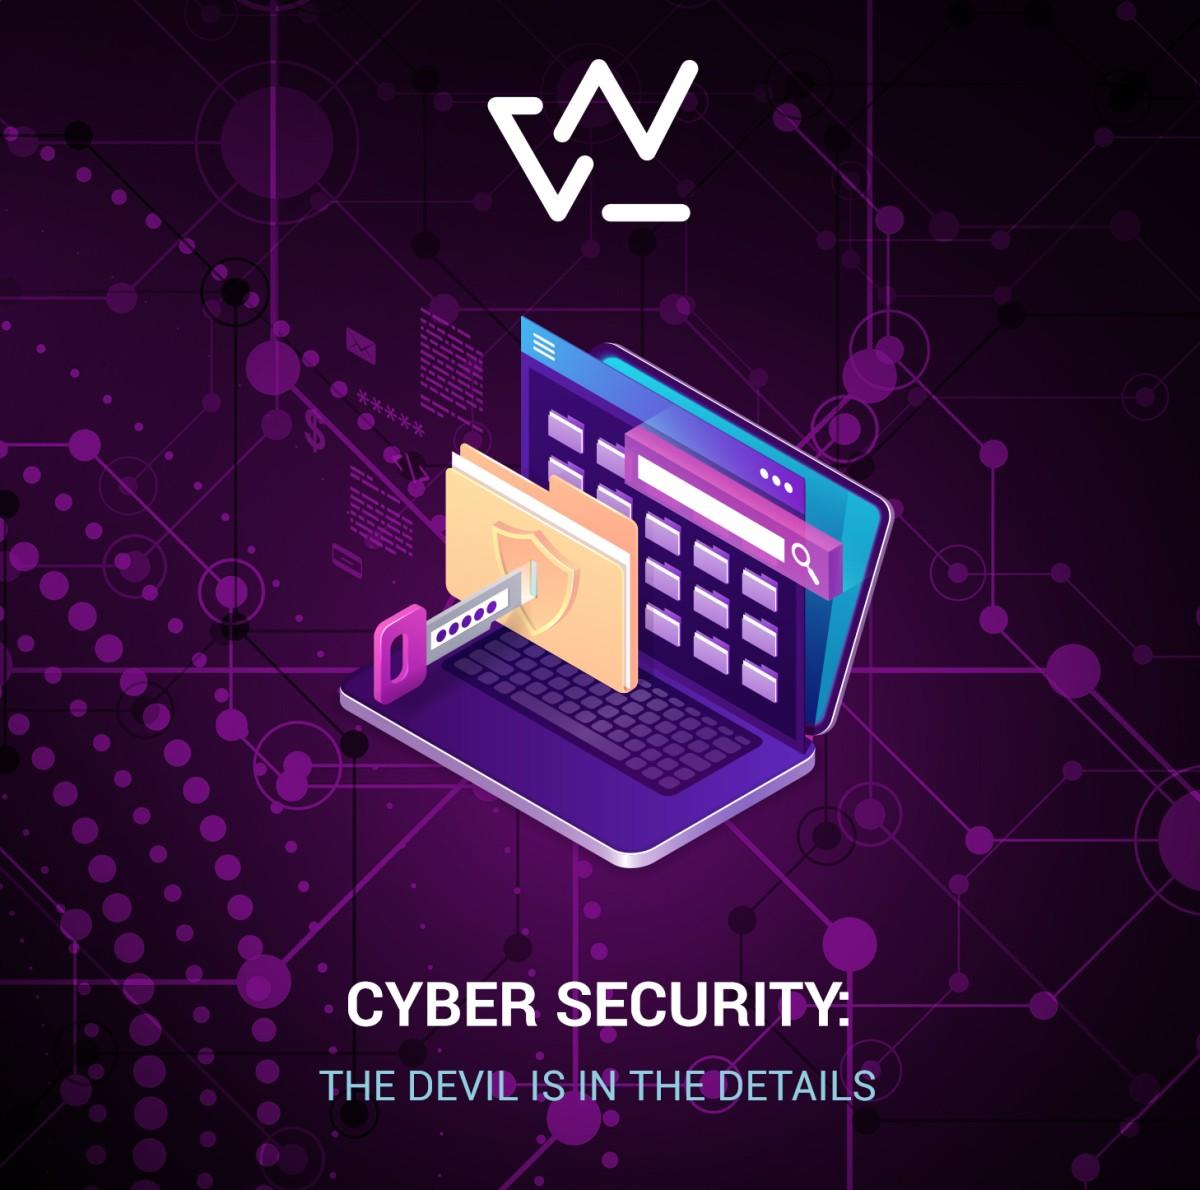 CYBER SECURITY: THE DEVIL IS IN THE DETAILS